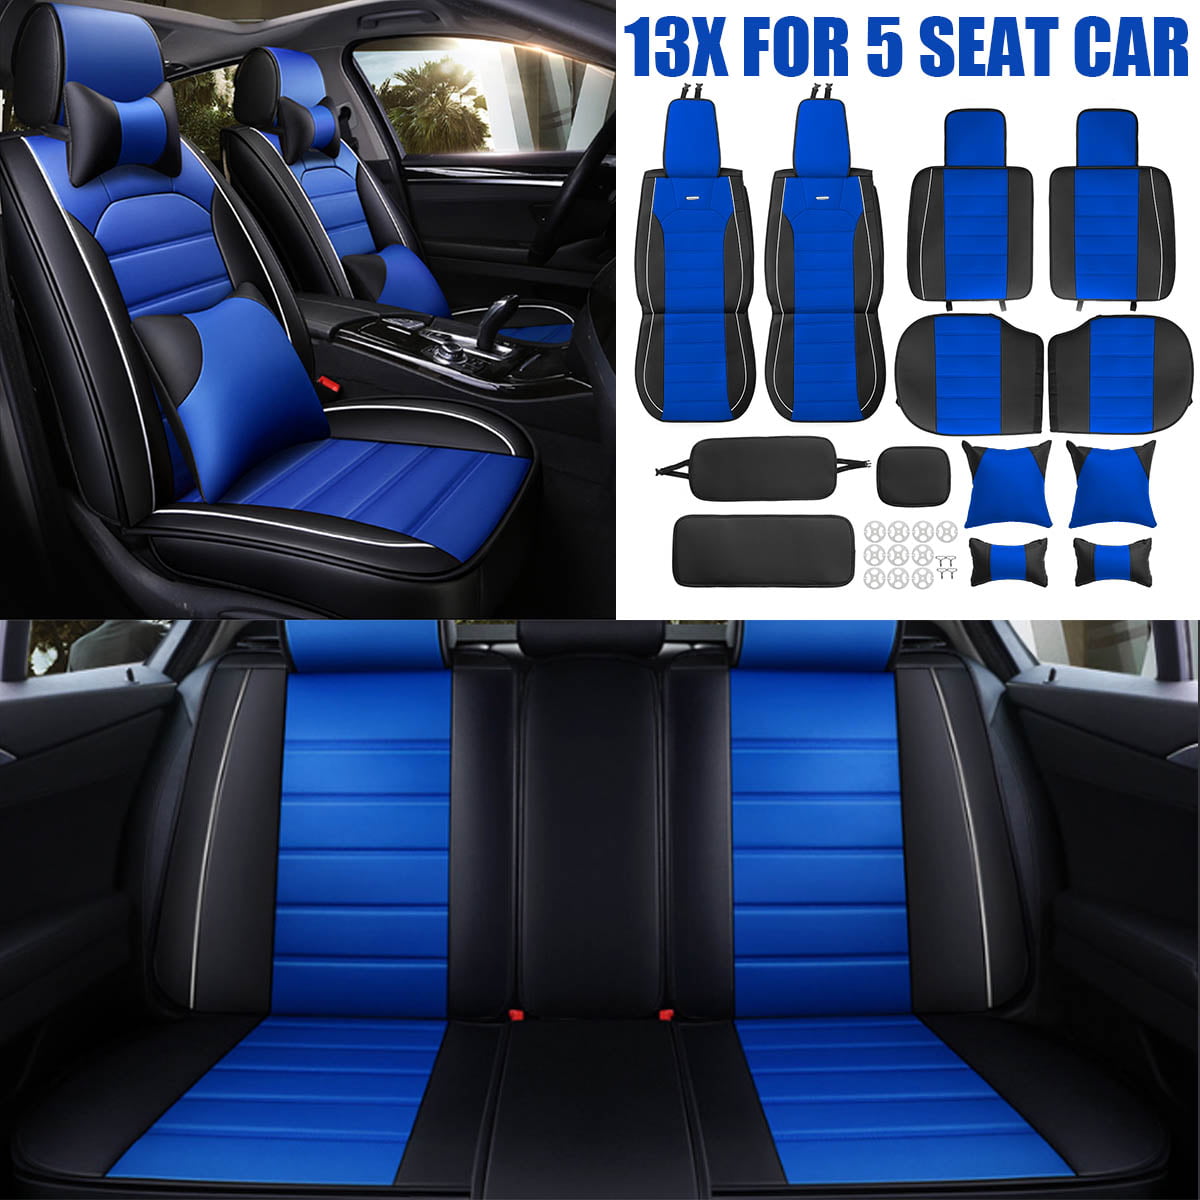 Color : Blue DAPENG Car Seat Cover Front Rear 5 Seat Full Set Universal Leather Seasons Protectors Pad Compatible Airbag with Pillow. 